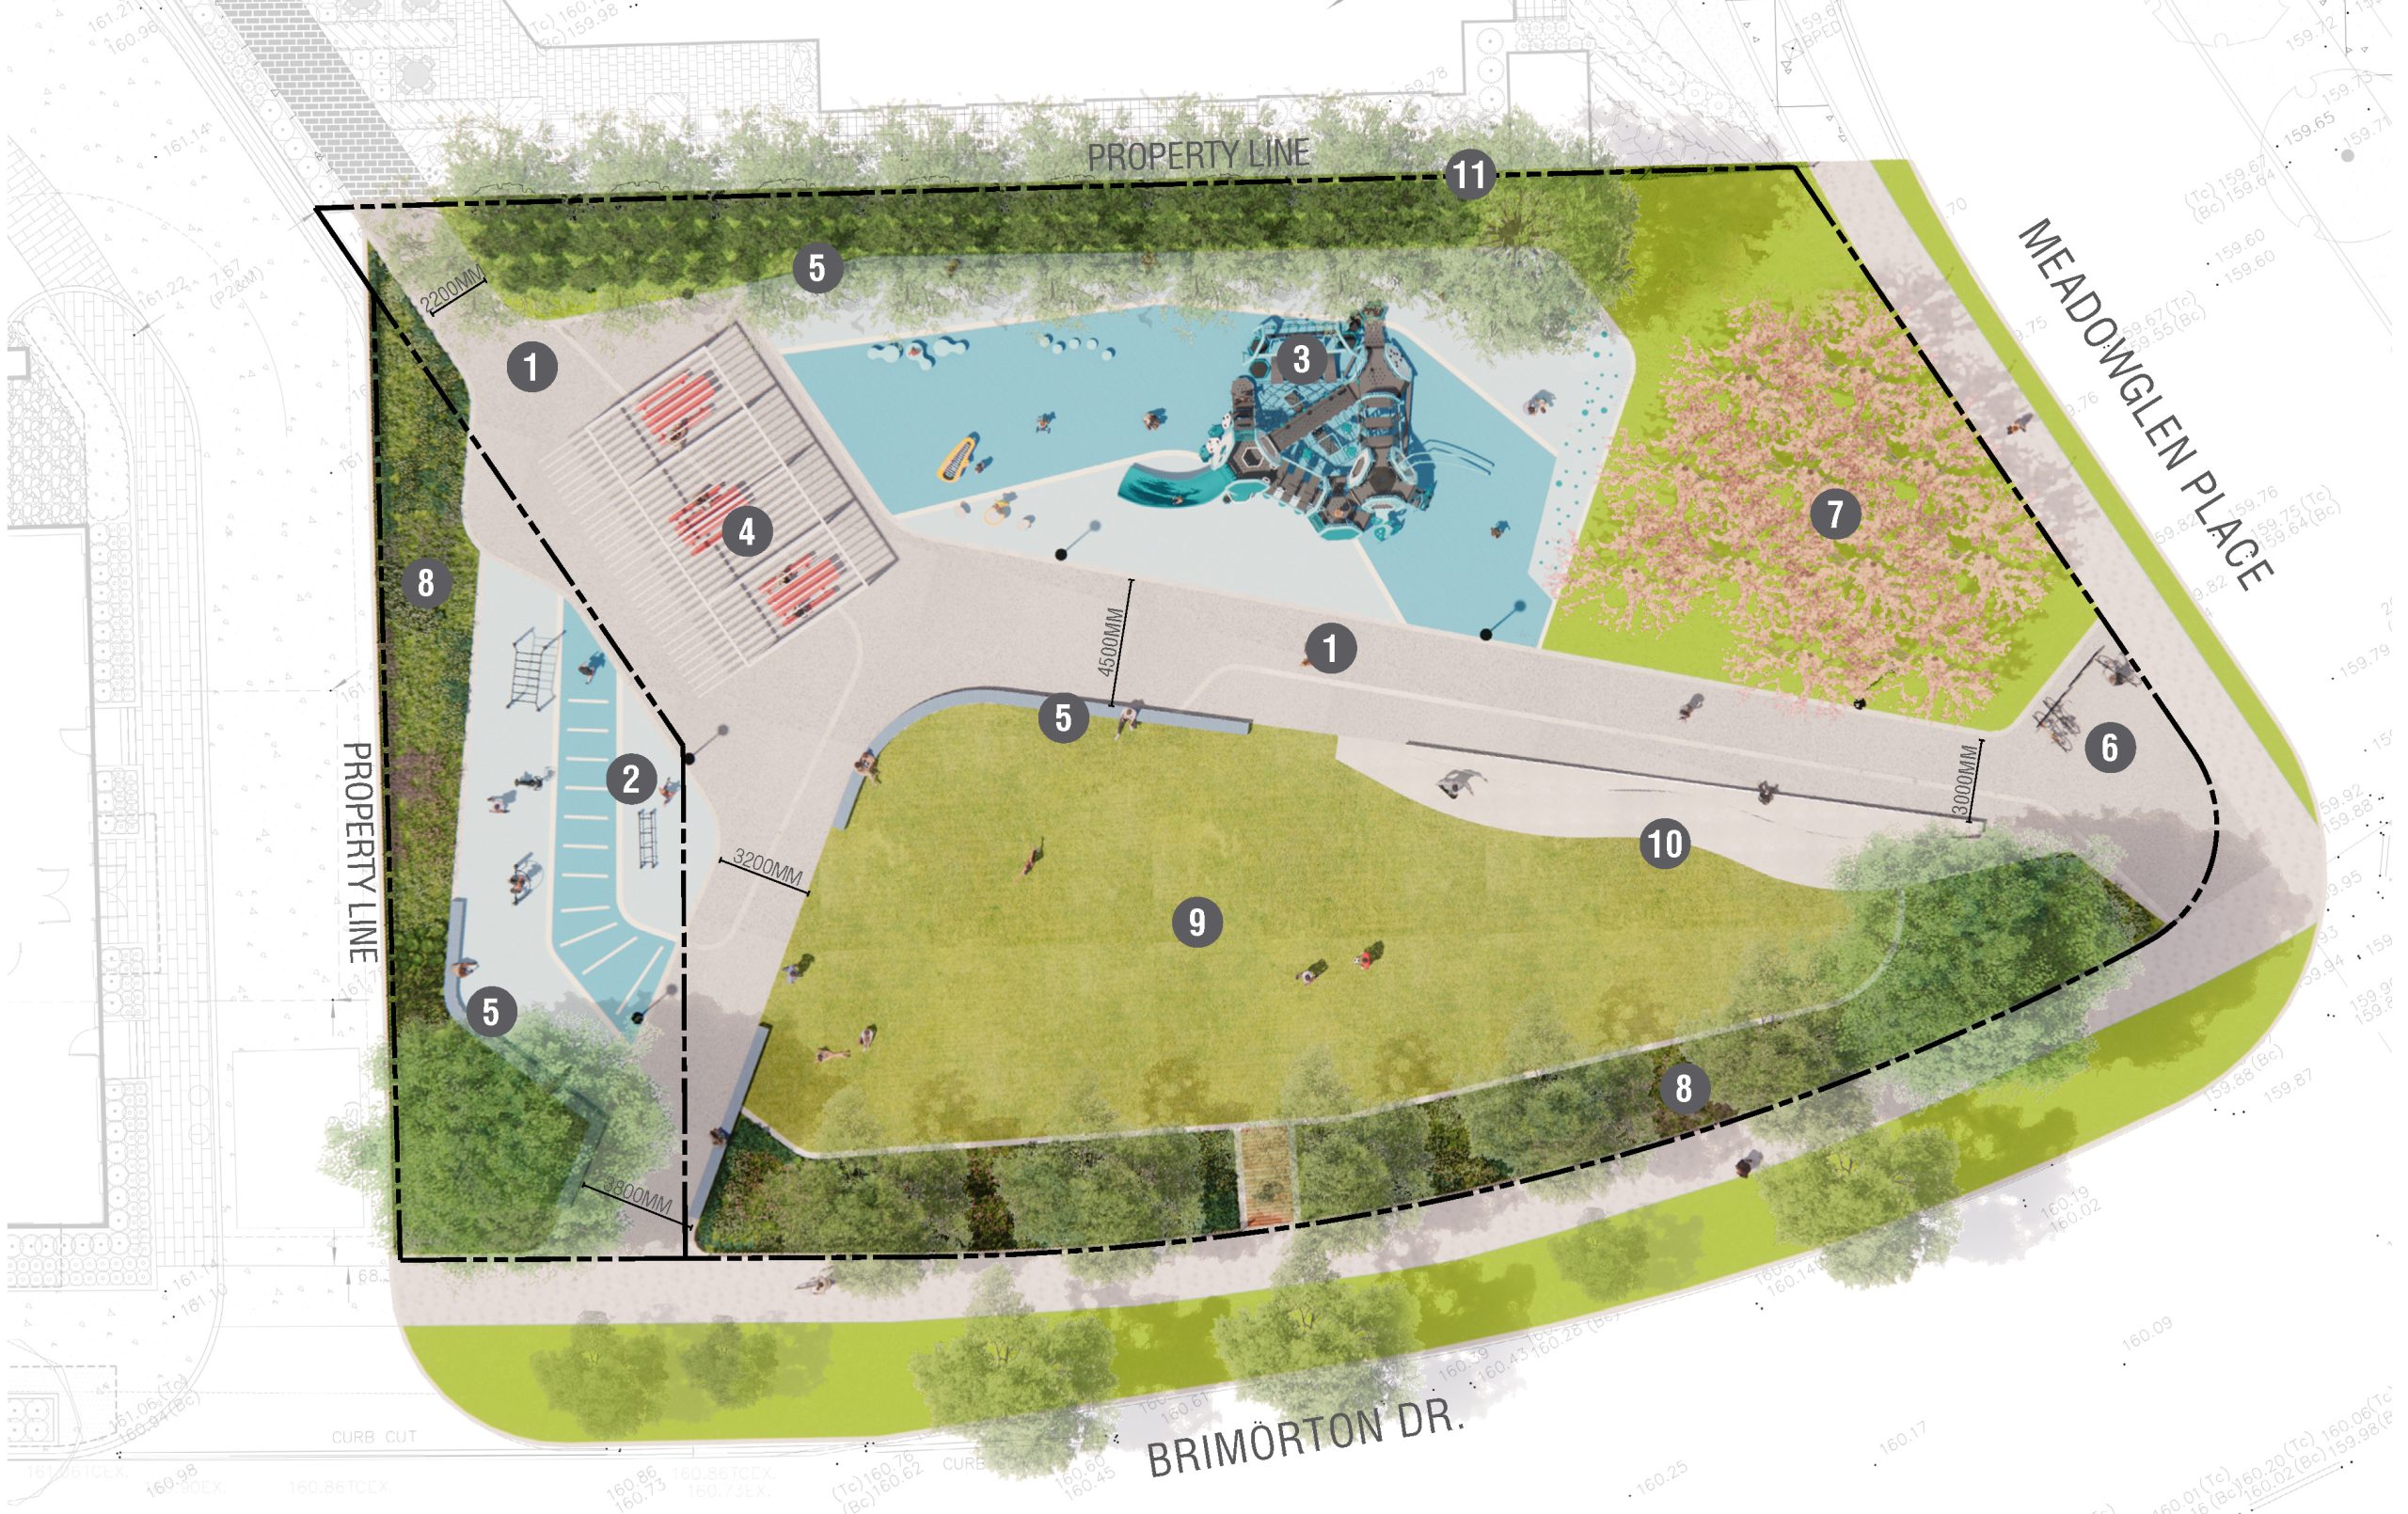 An aerial site plan for the new park with numbered labels throughout showing the location of features and amenities. From the bottom left to top right, it includes seating, a large open law area and skate feature, a decorative fence separating the main pathway from the open lawn area, outdoor fitness equipment at the west side of the park, bike racks at the east side of the park, near the entrance on Meadowglen Place, cherry blossom trees near the entrance, a playground near the north side of the park with an adjacent shade structure and seating nearby. 